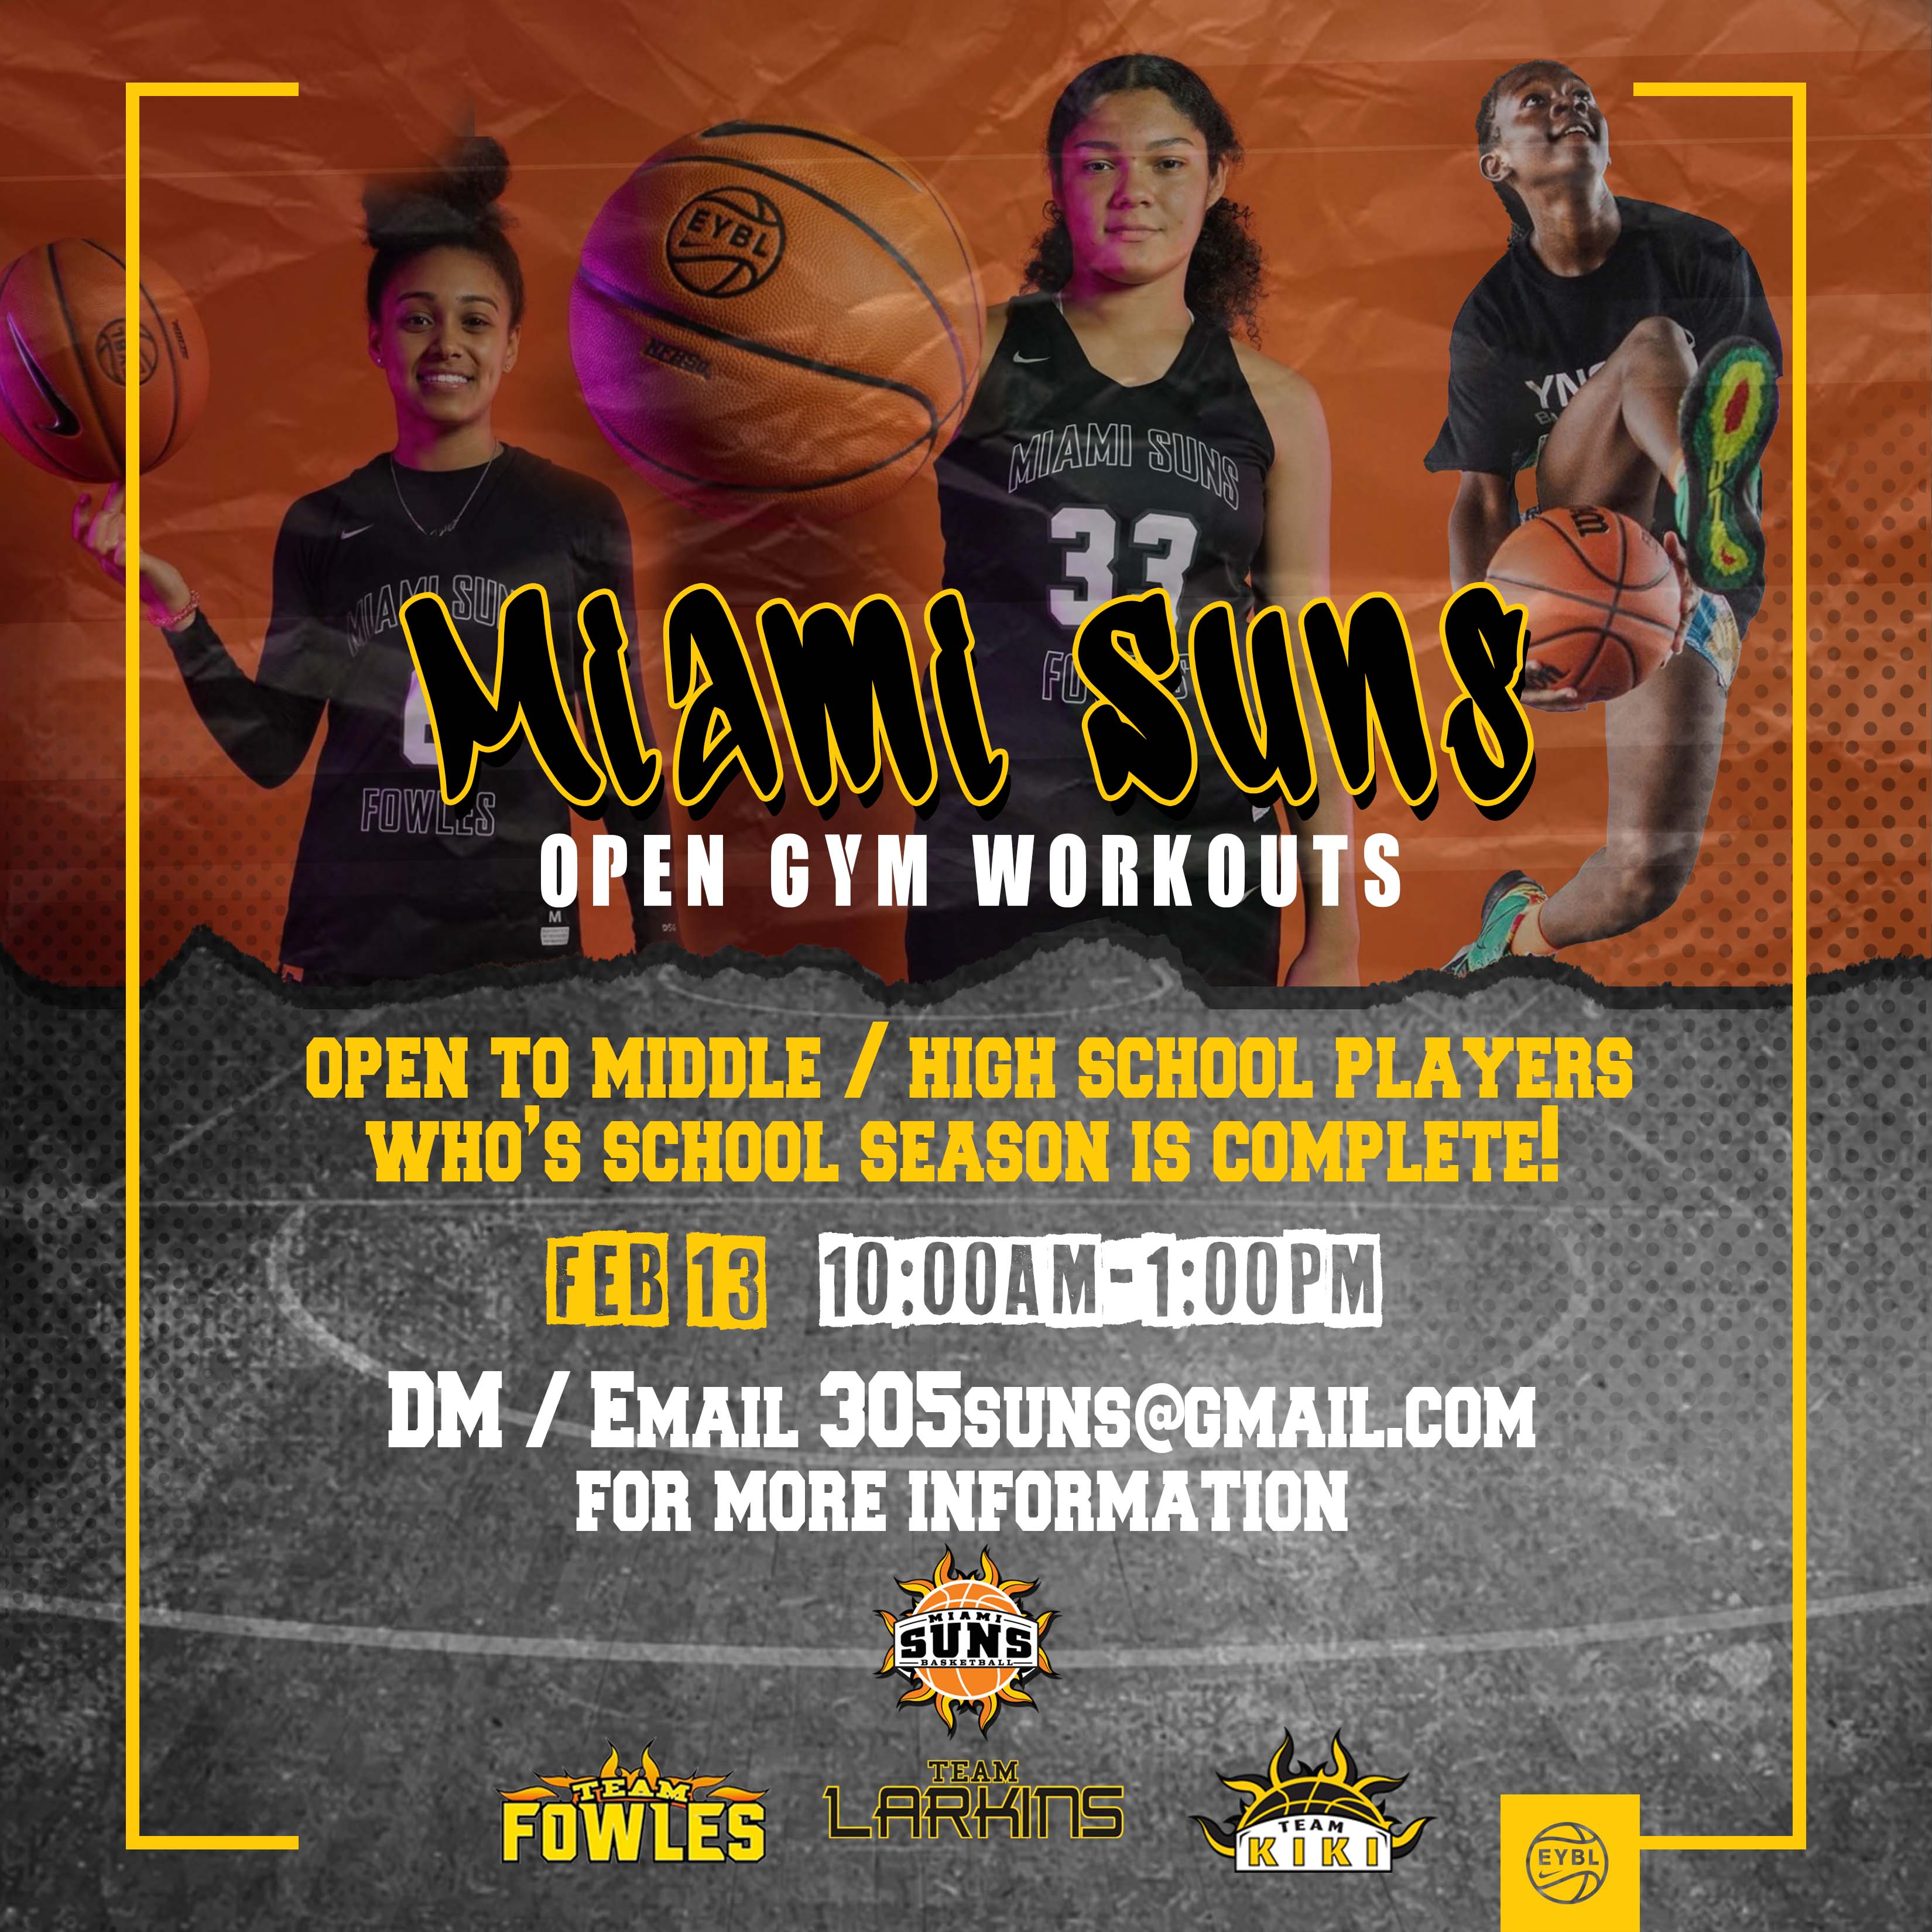 Miami Suns Open Workout – Sunday Feb 13th in Hialeah, FL.